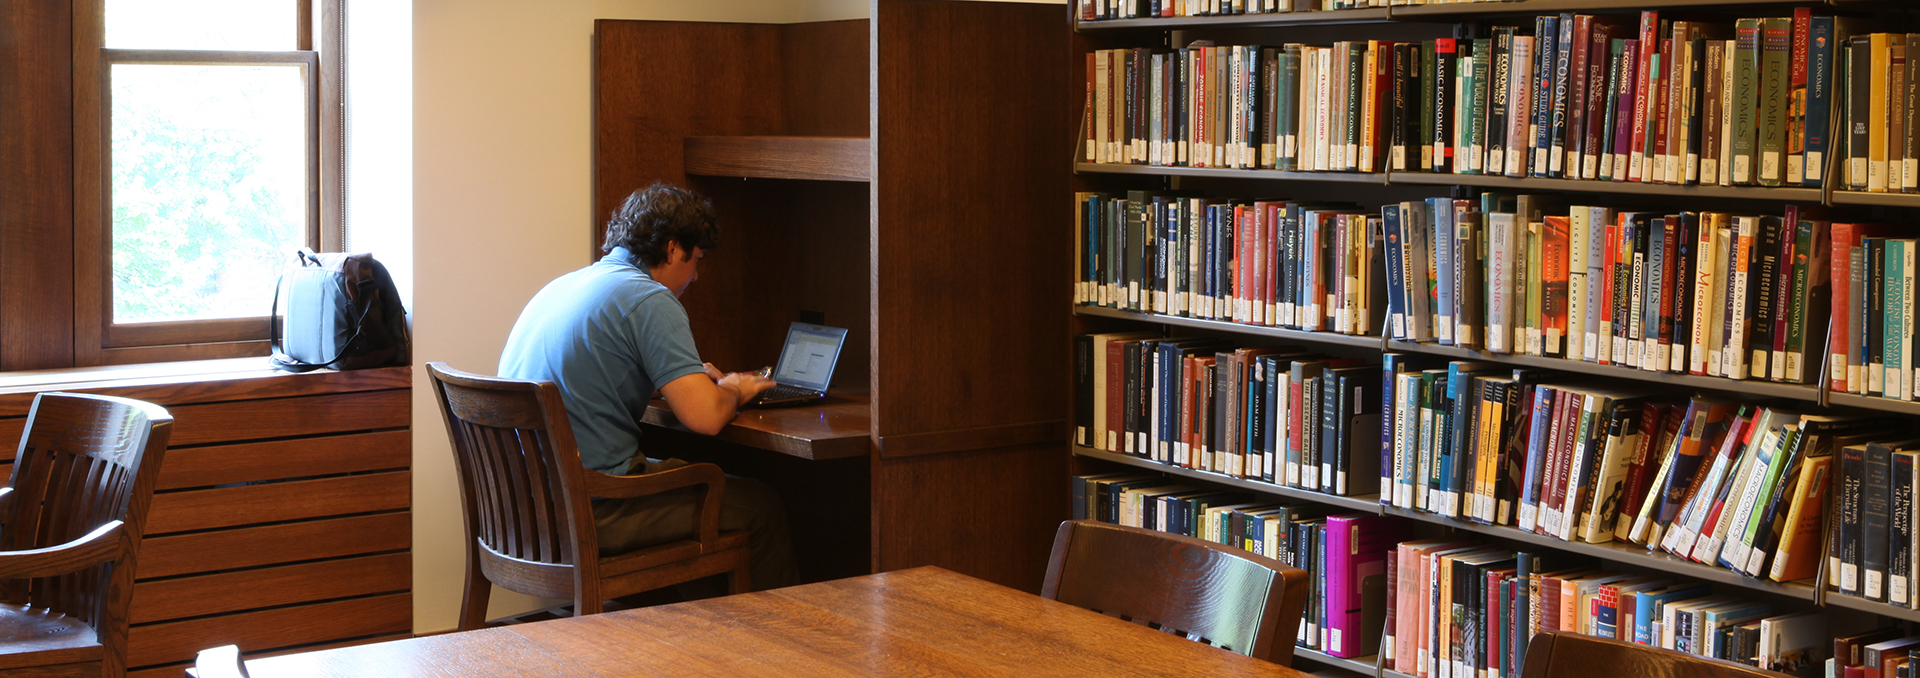 Student studying at a carrel in the John W Graham Library